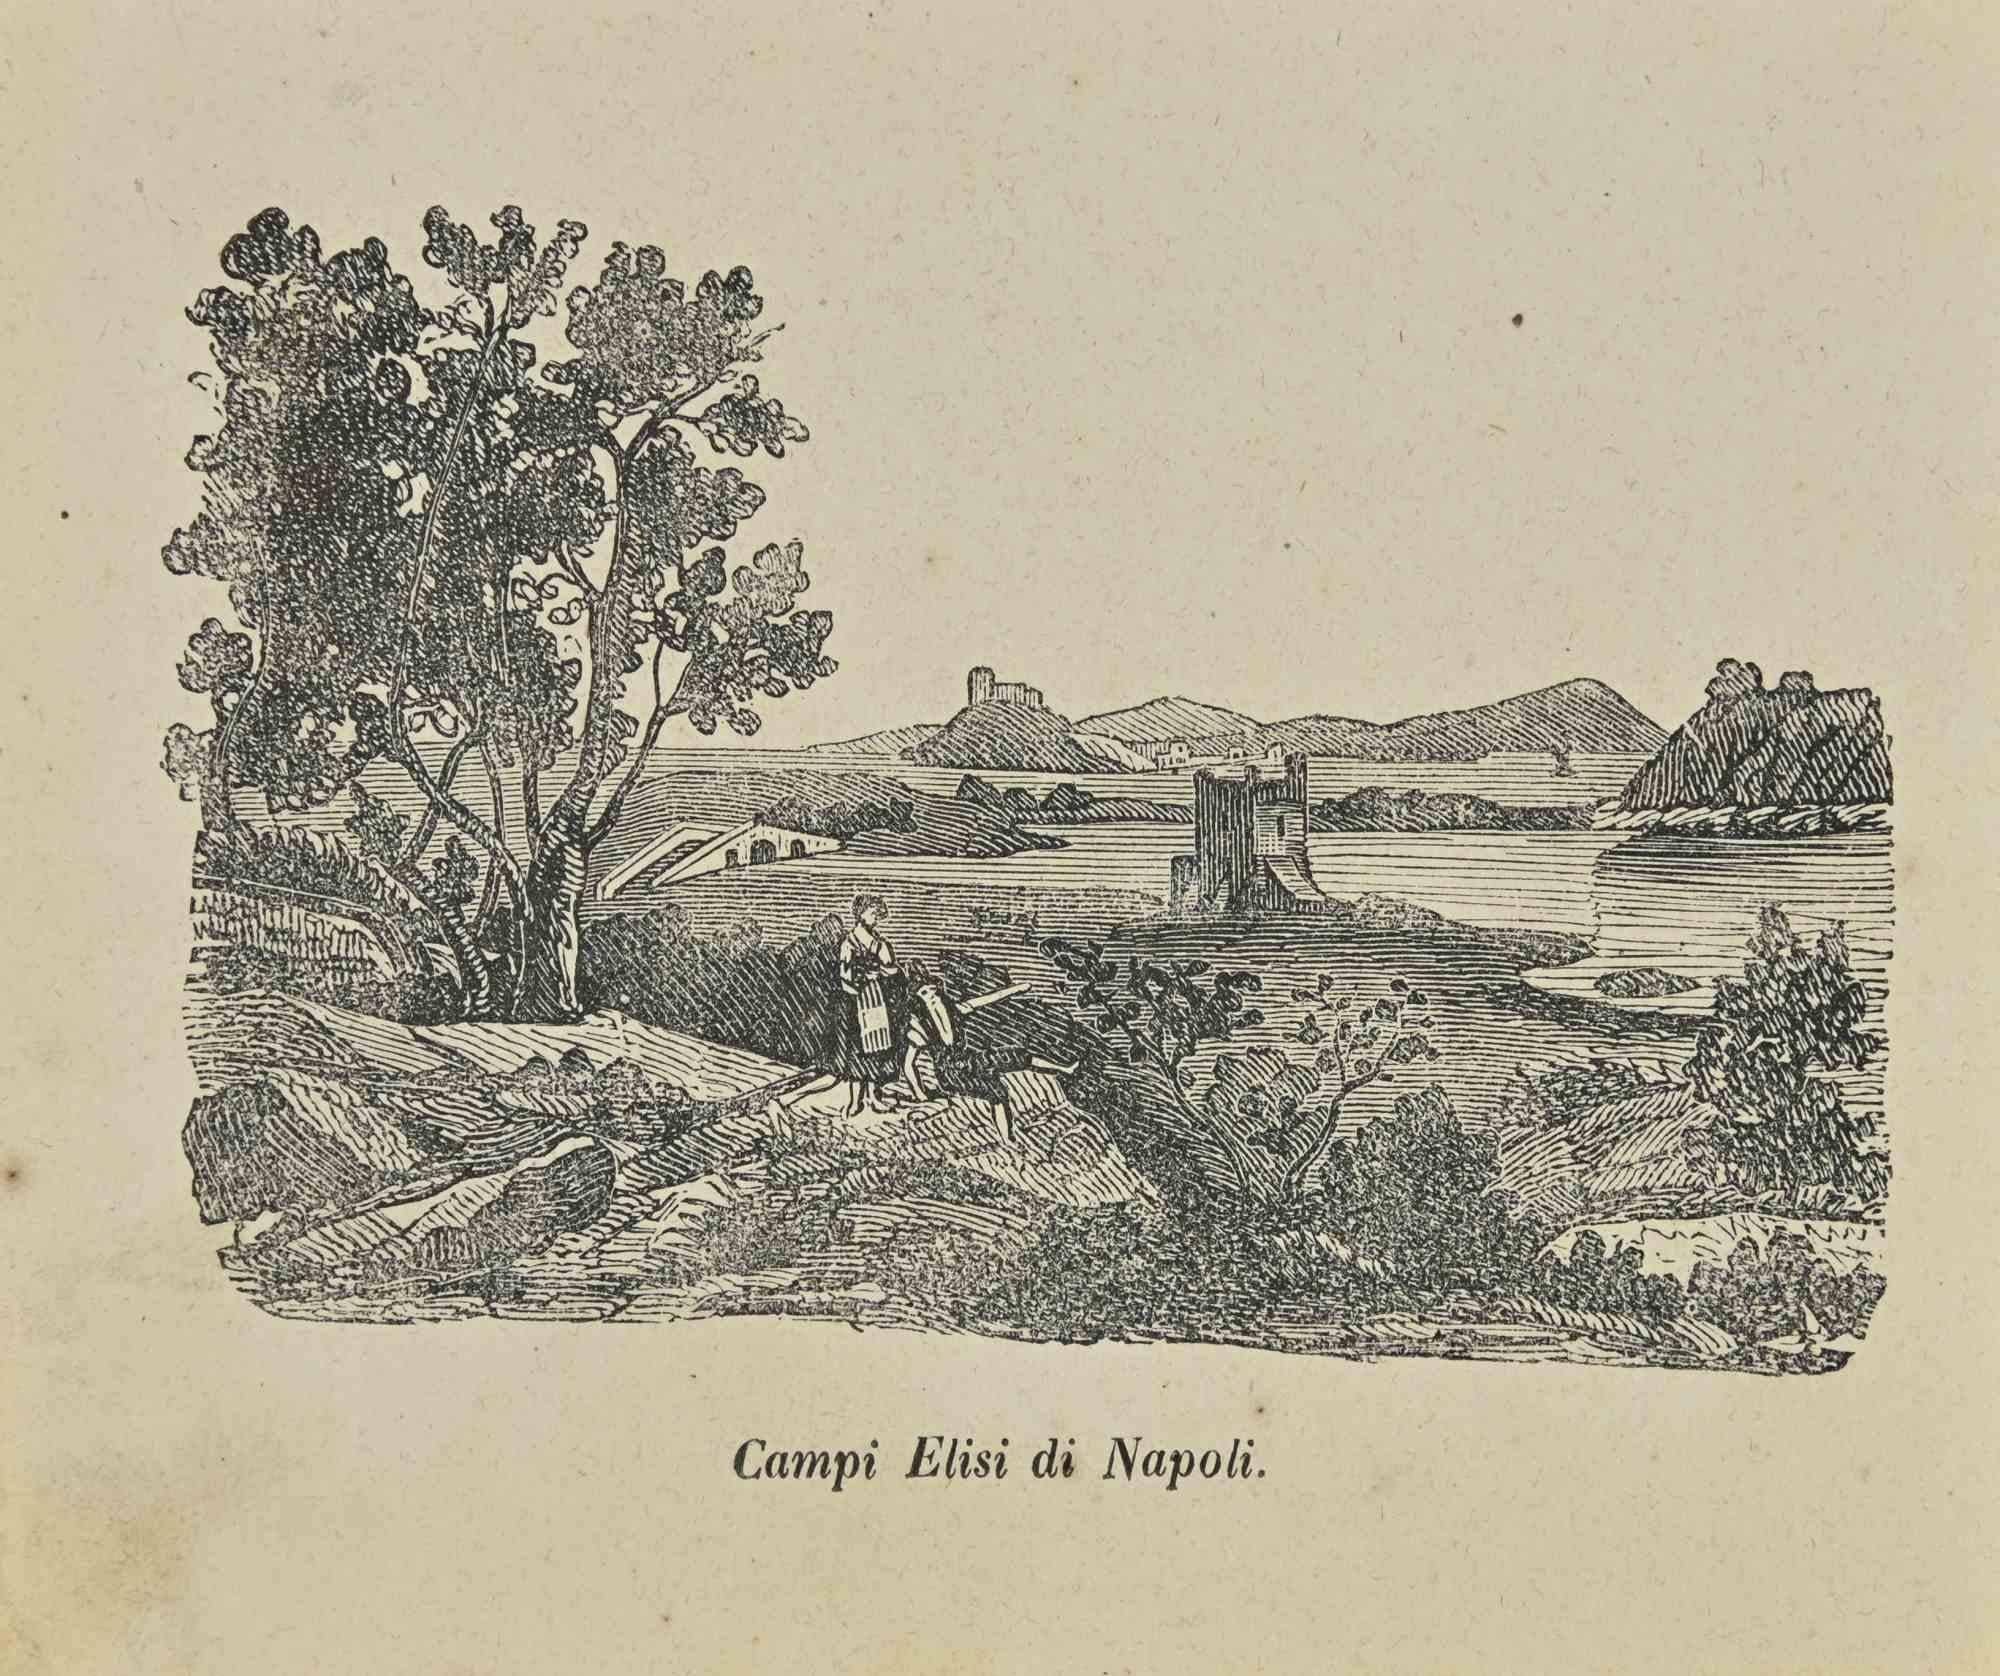 Uses and Customs - Elysian Fields in Naples - Lithograph - 1862